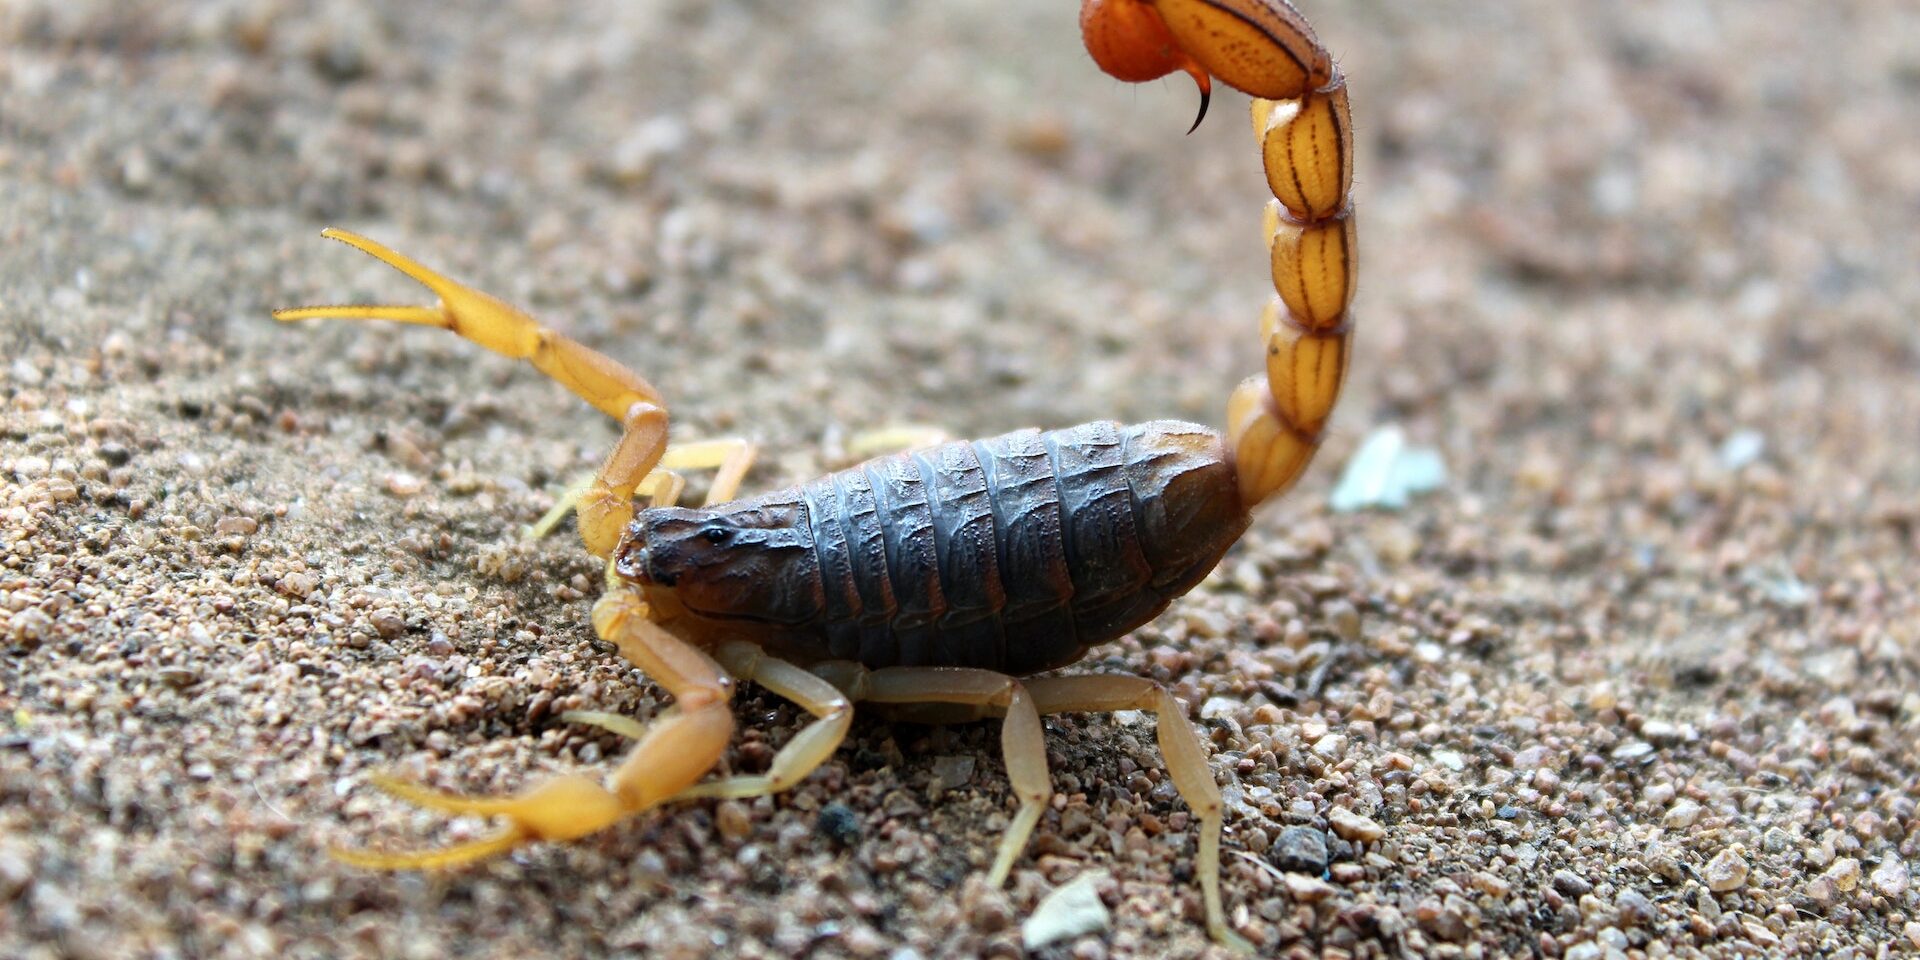 How to Keep Scorpions Out of Your House